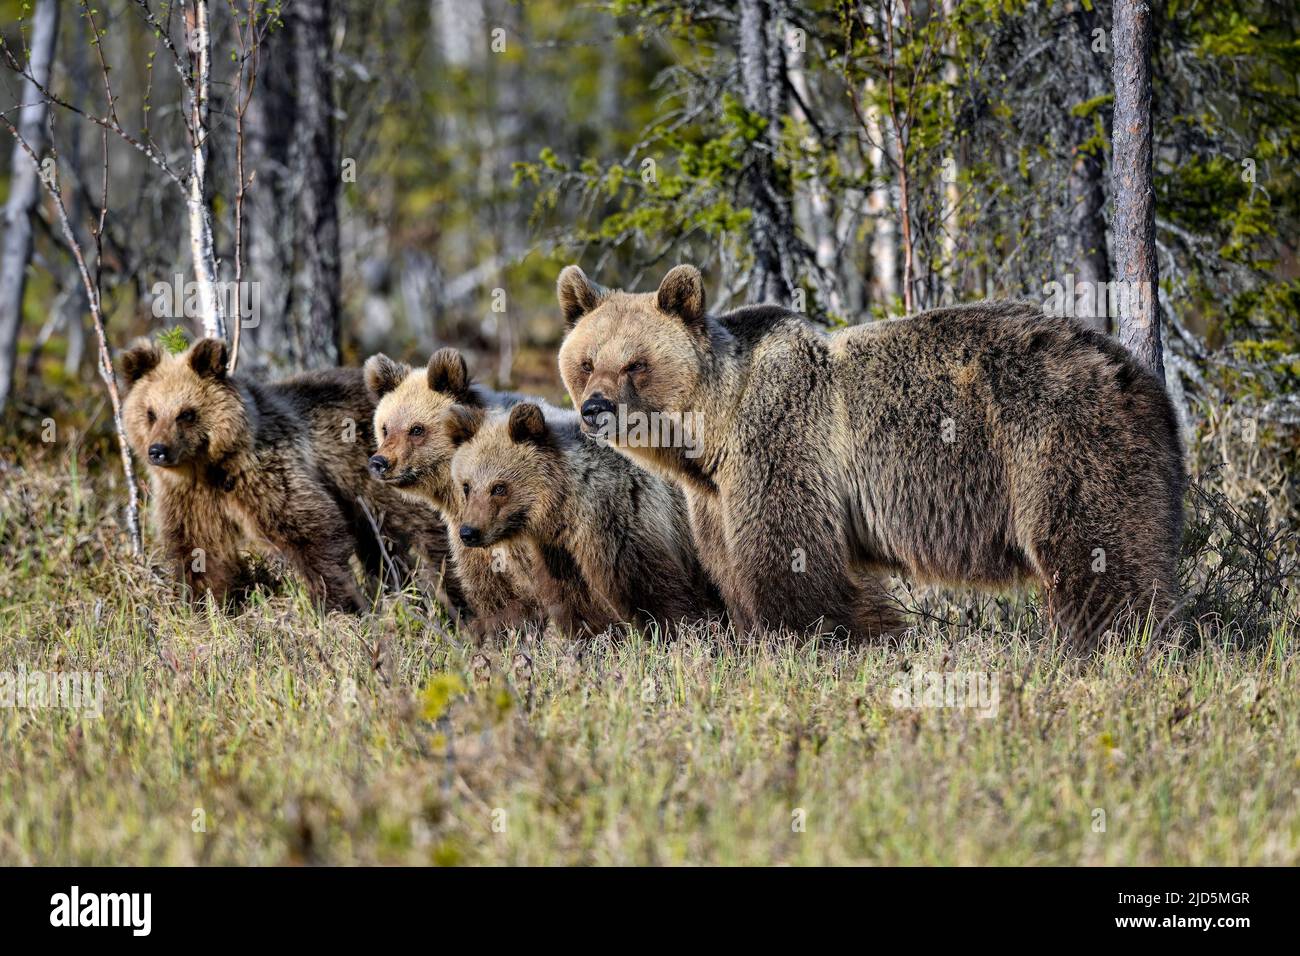 The whole Bear family in observation mode Stock Photo